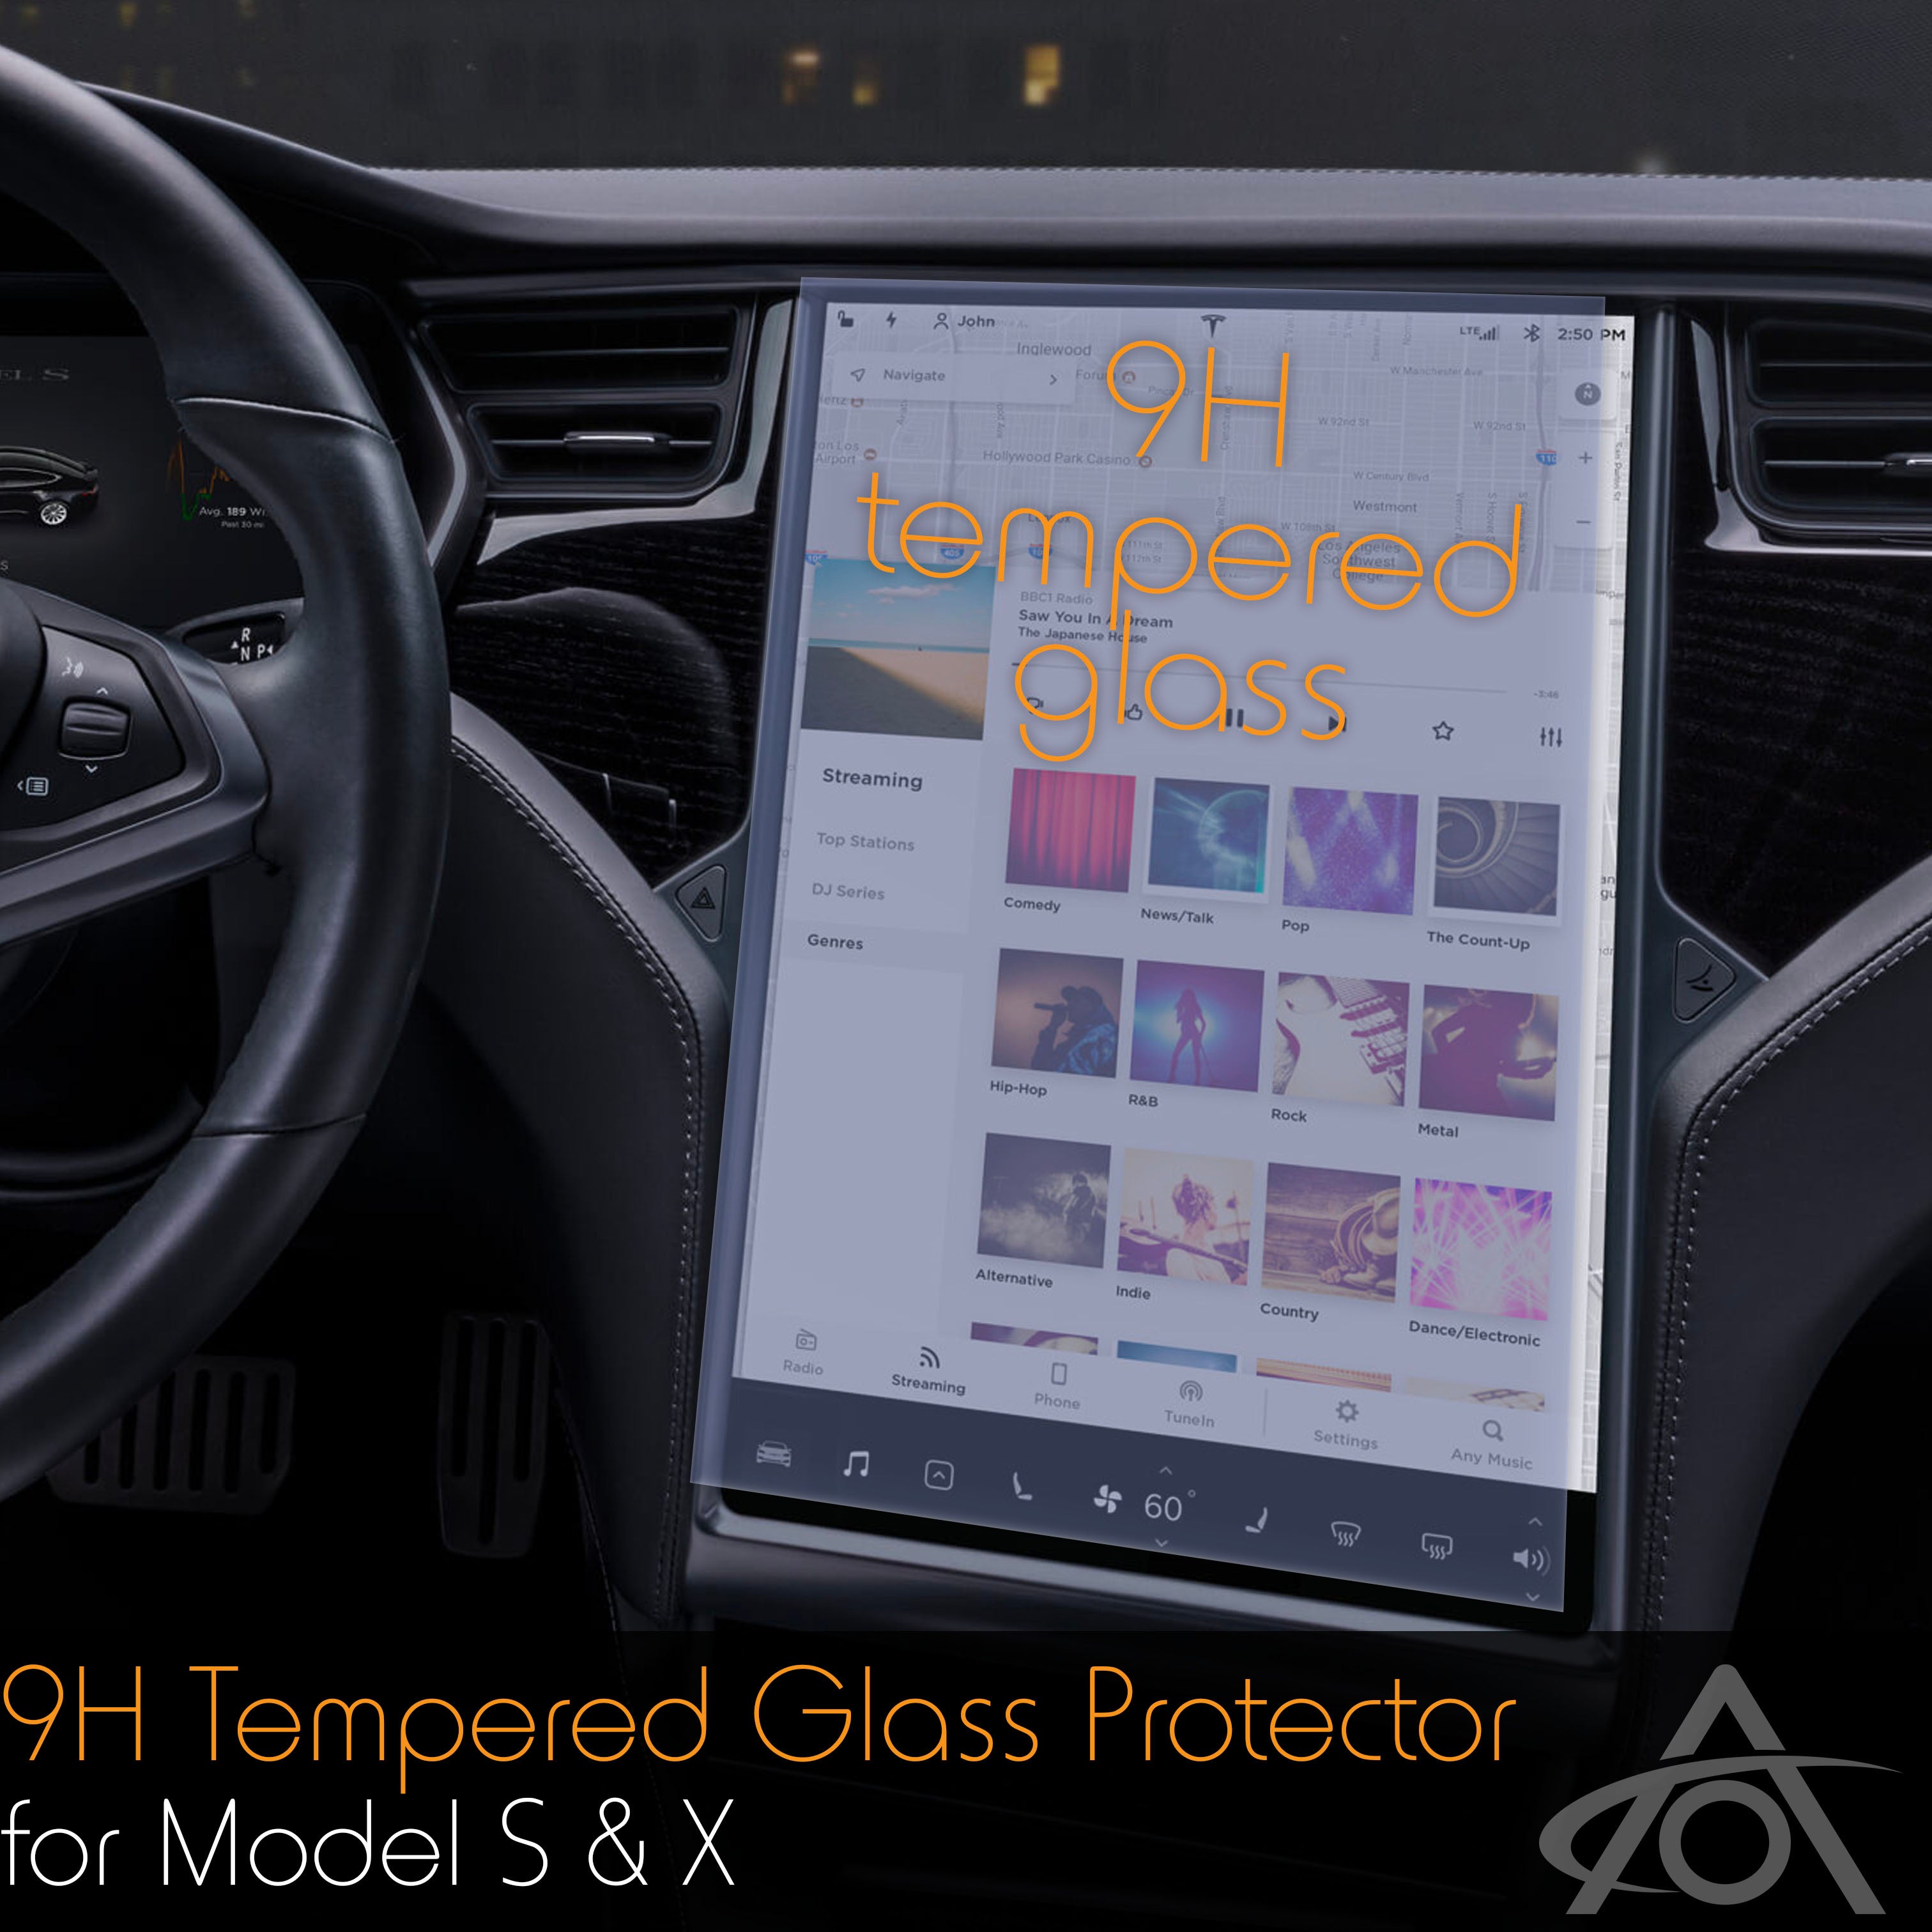 Tempered Glass (9H) Screen Protector for the Tesla Model S & X (pre-refresh)